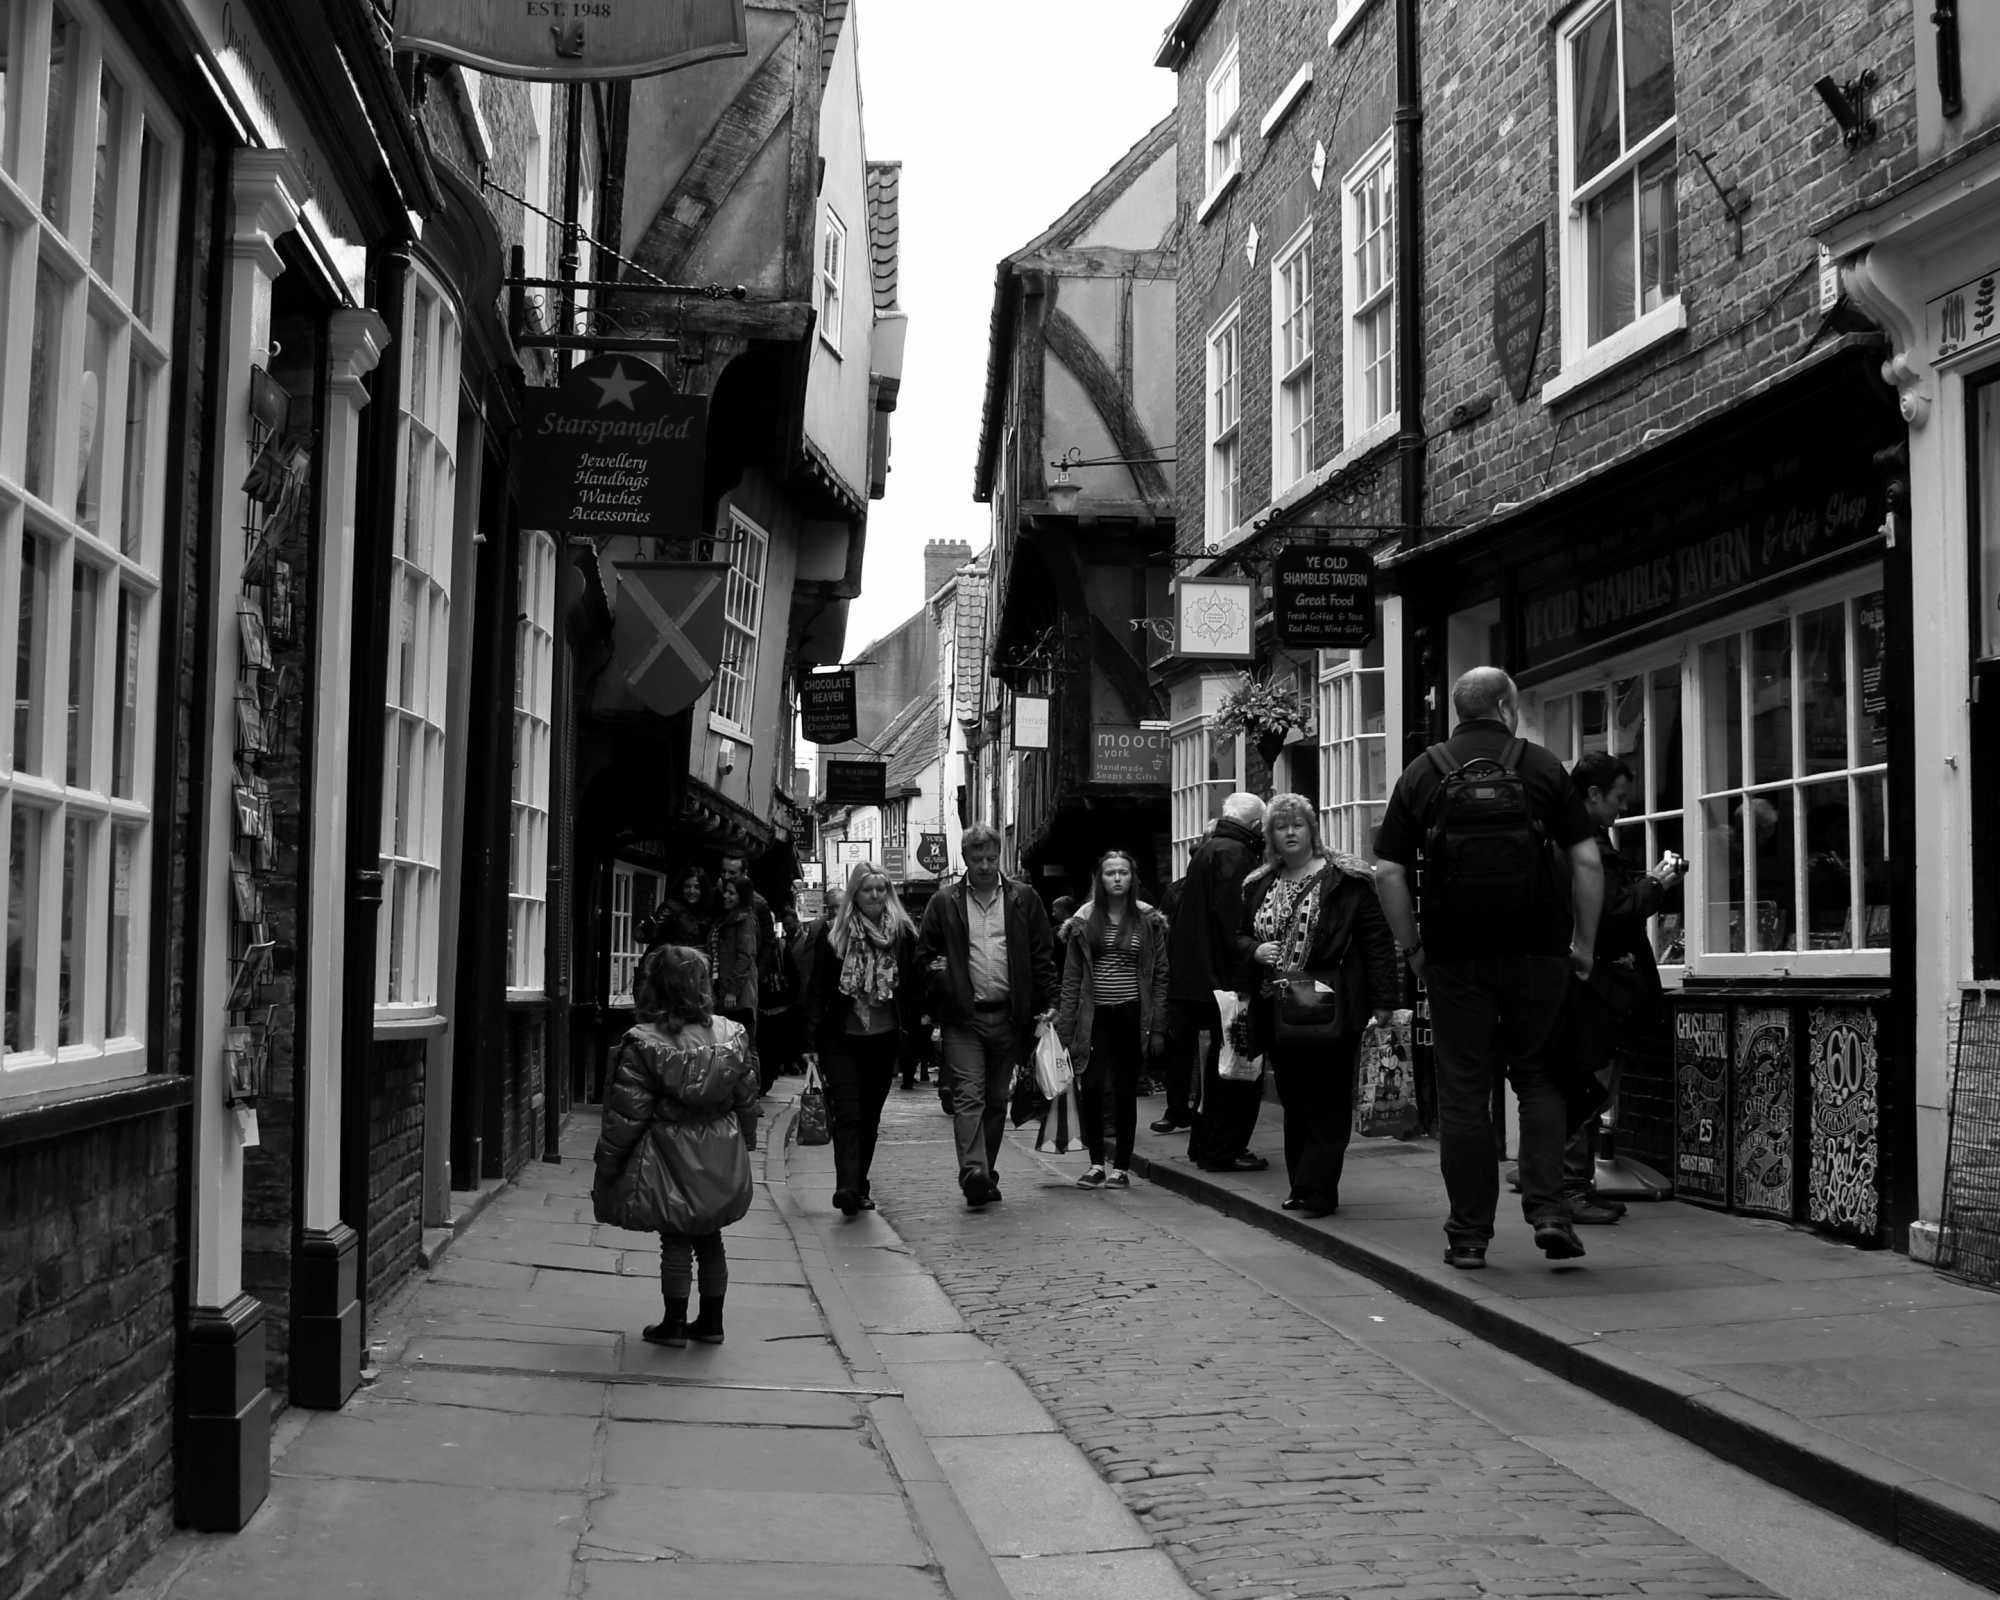 The Streets of York